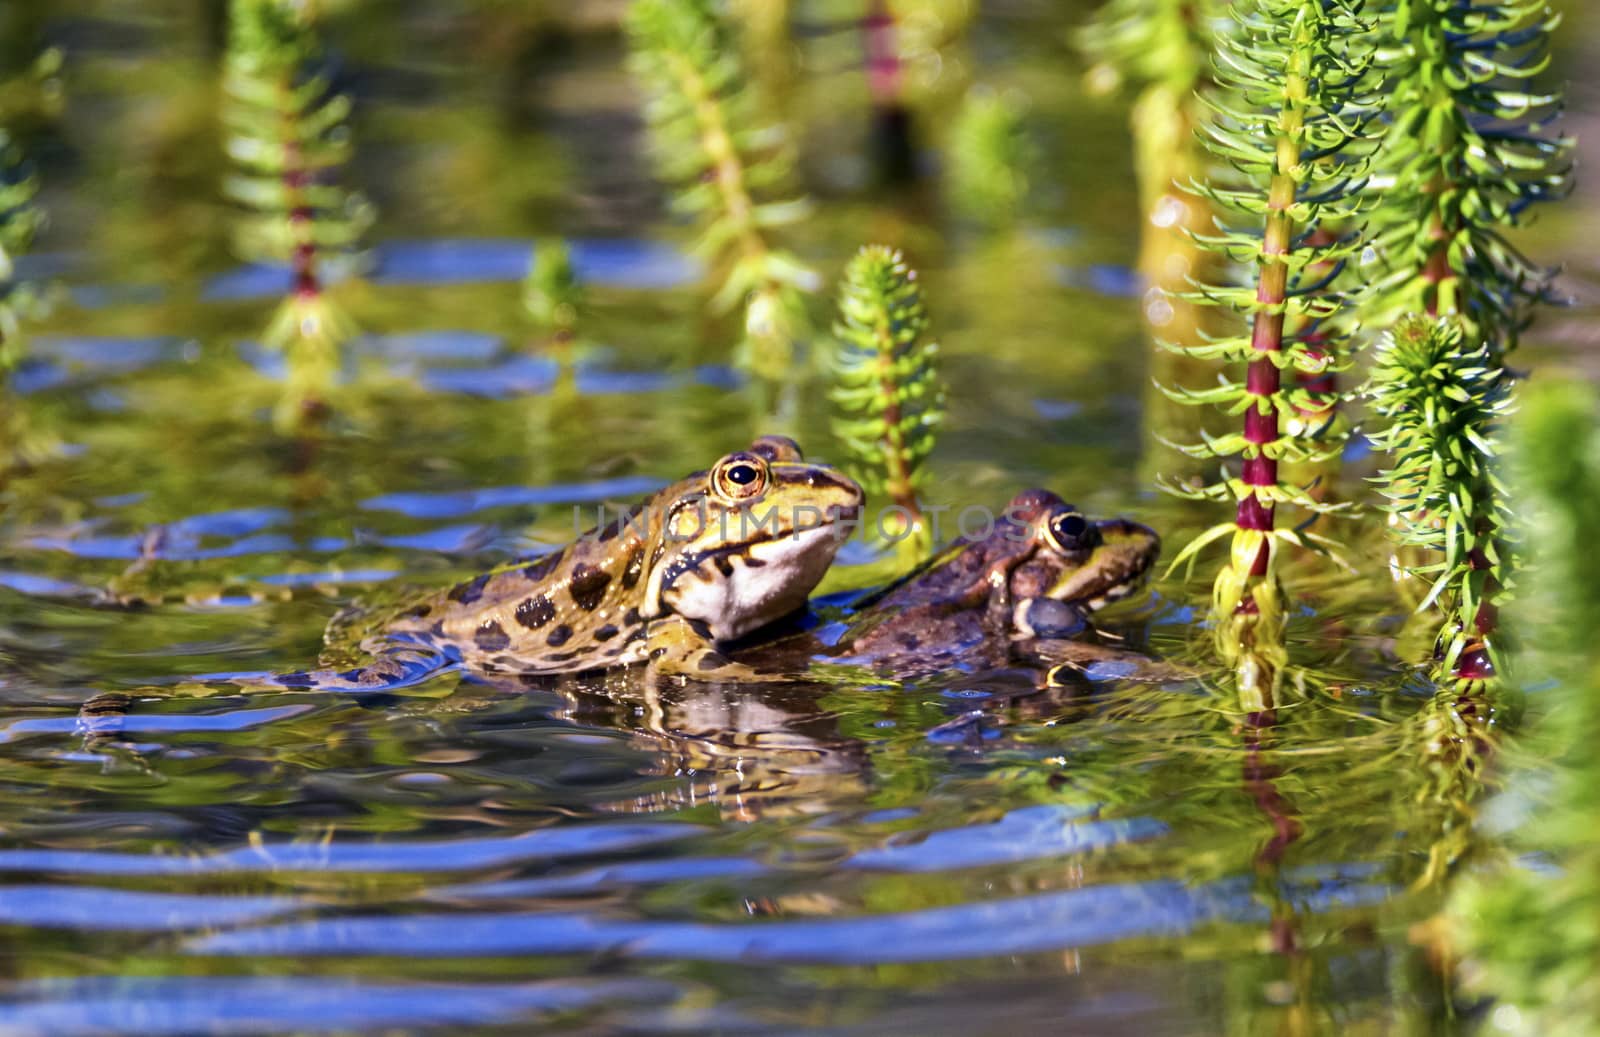 Frog mating in a pond by Elenaphotos21